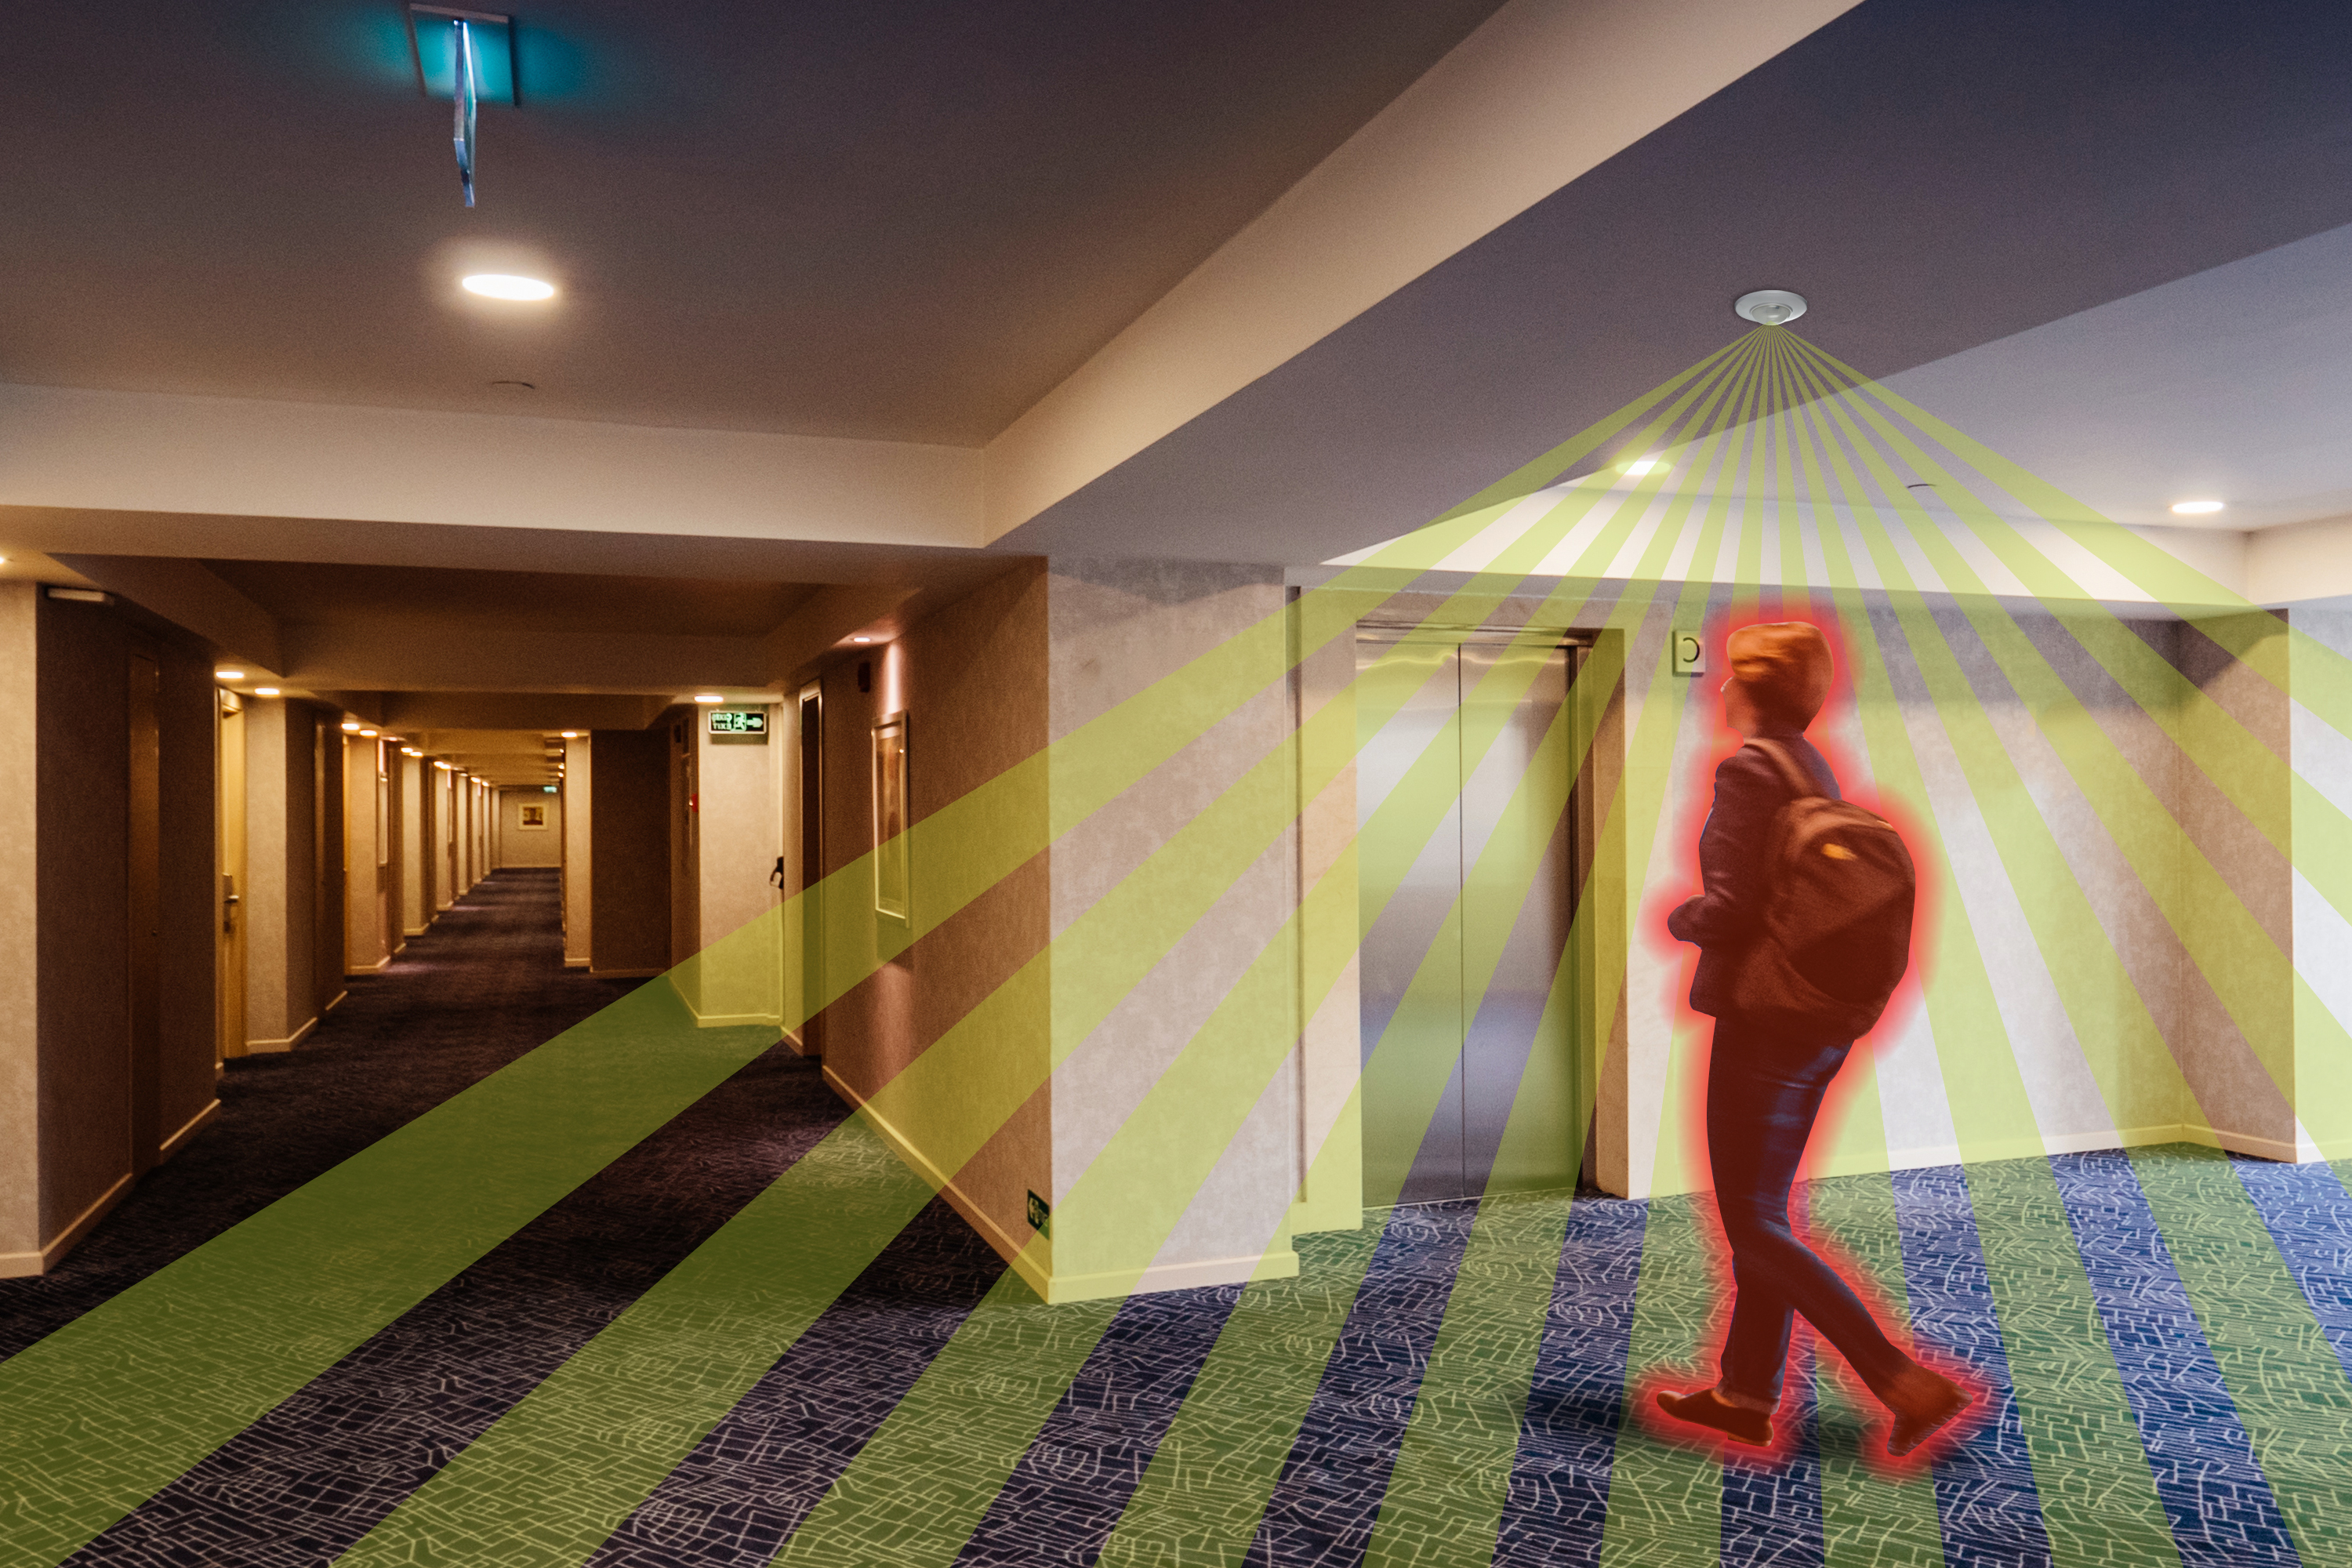 Woman walking in corridor with illustration of PIR sensor detection over the top. The woman has a red glow to indicate heat.